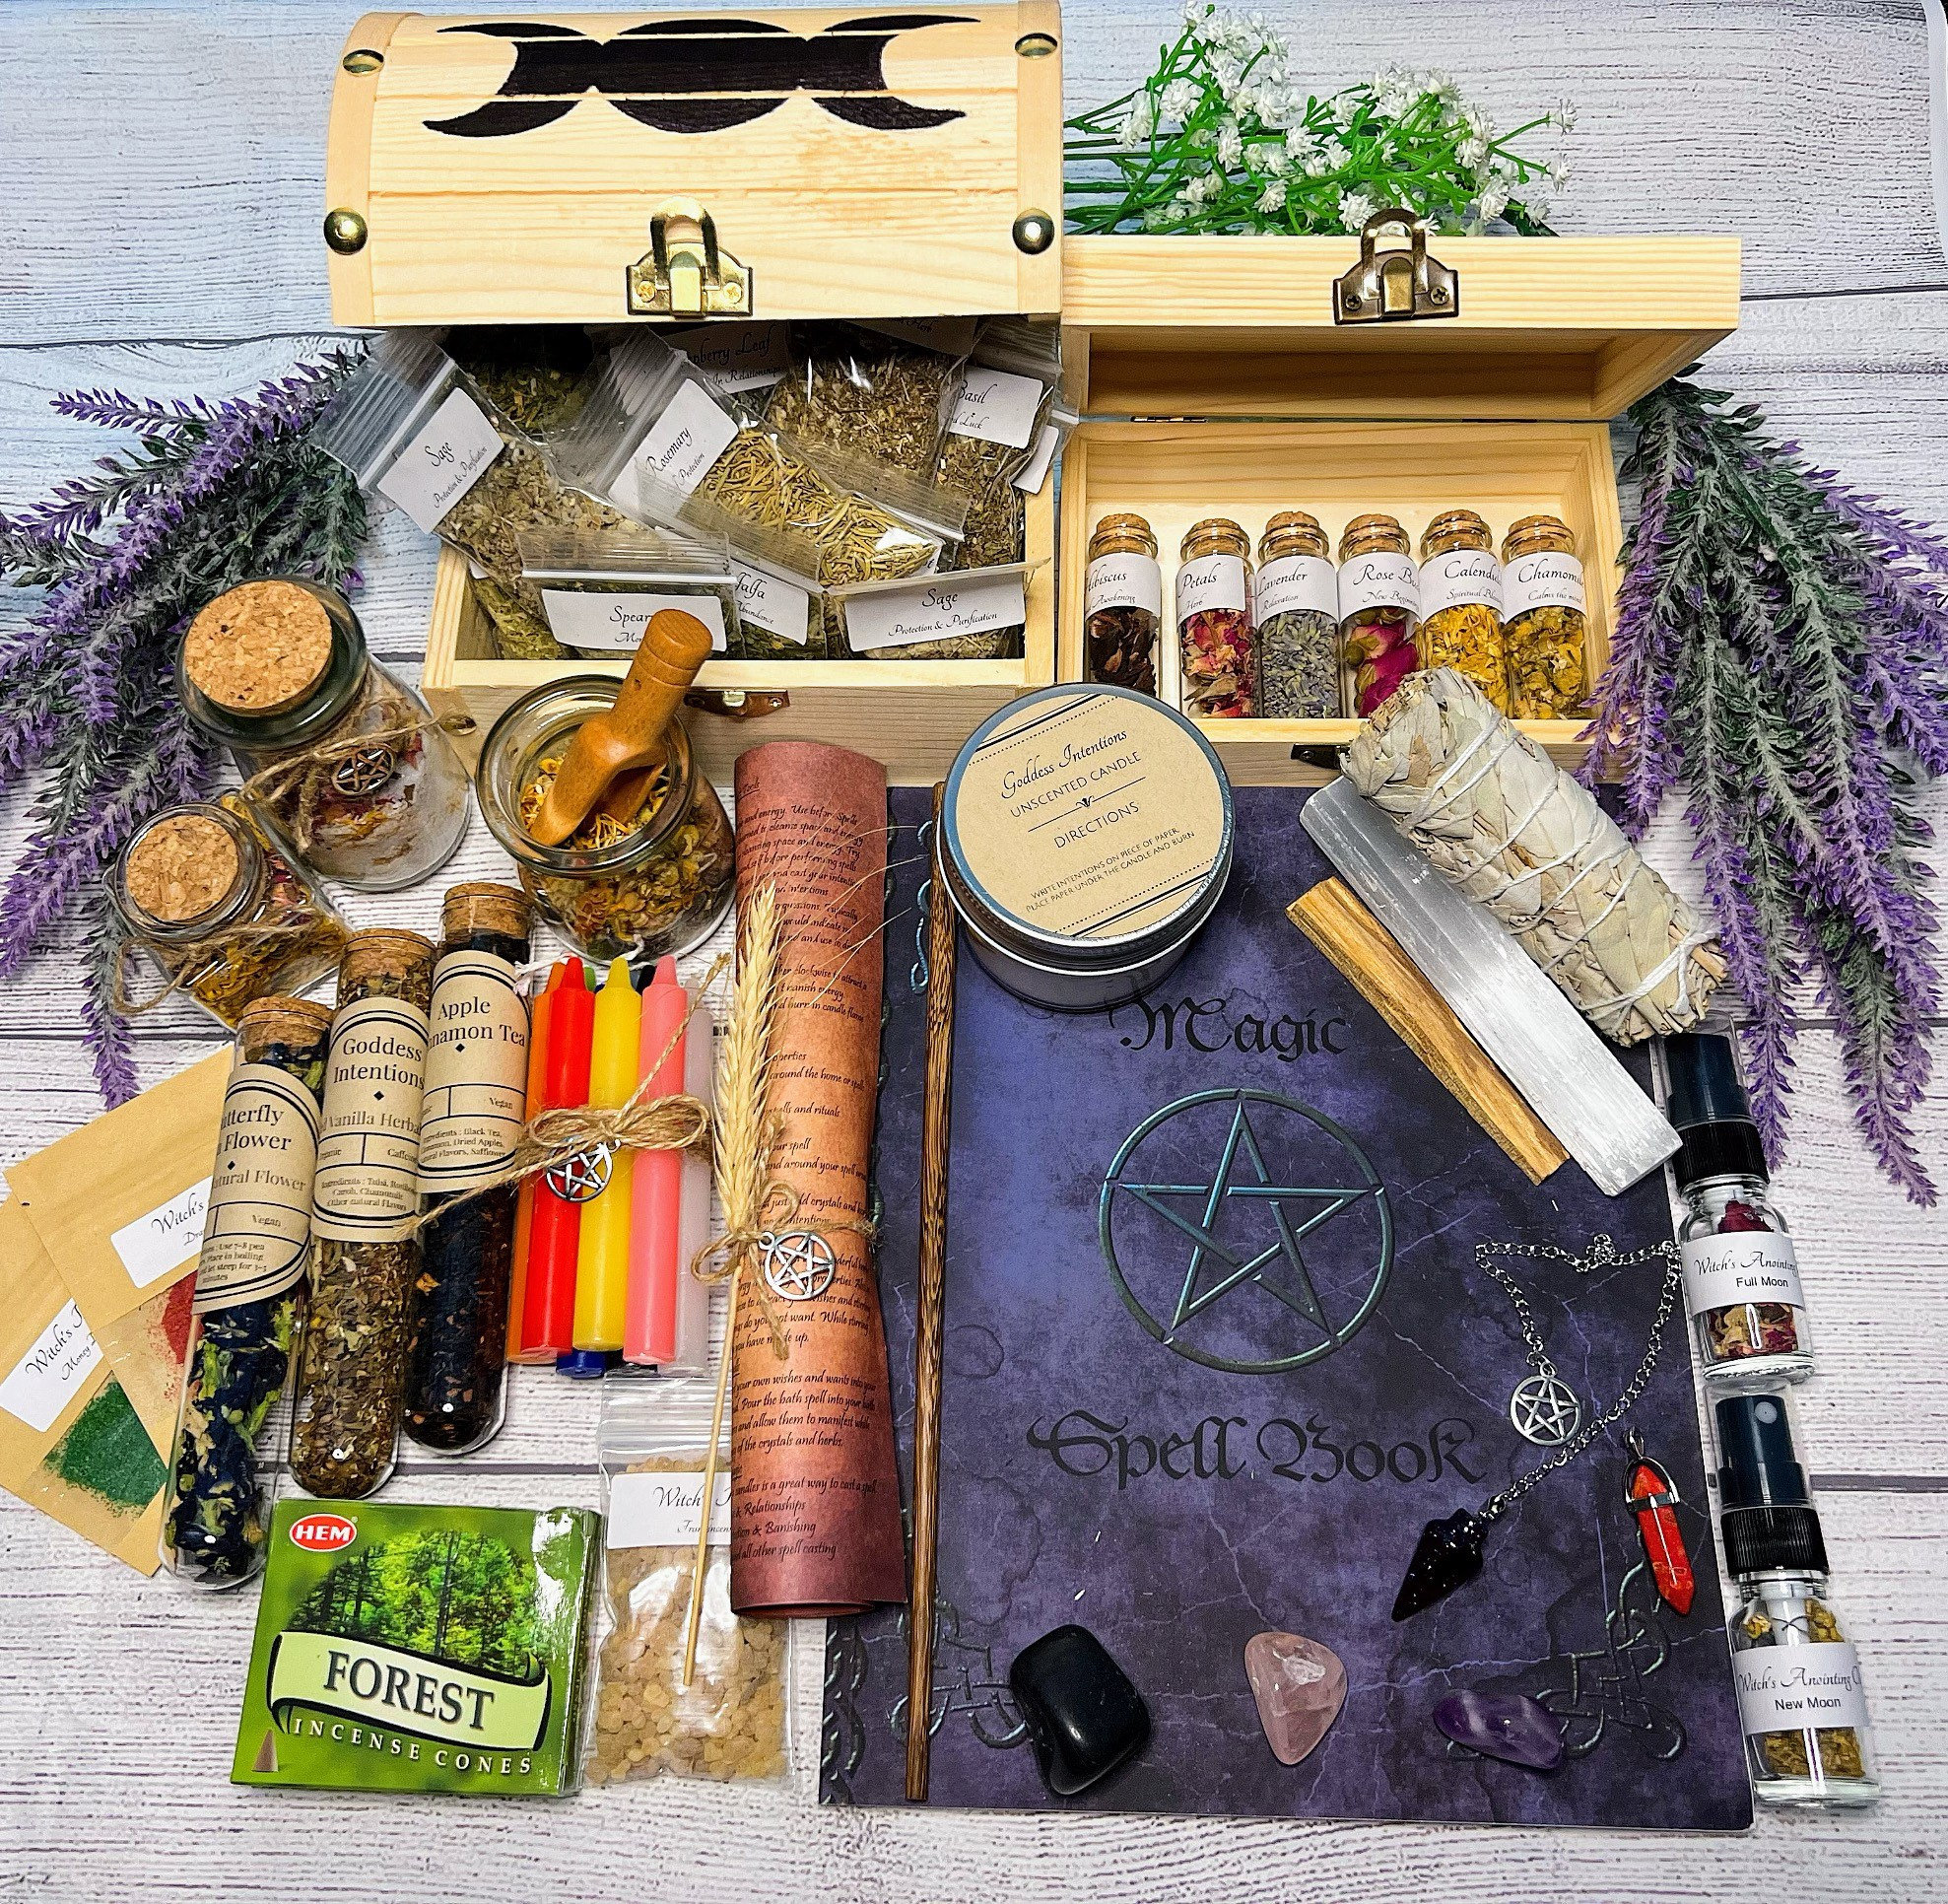 54pcs Witchcraft Supplies Kit For Witch Altar, Spell Candles For Witches,  Crystals Spell Jars For Witches, Herbs For Spells, Beginner Witch Kit Box, W